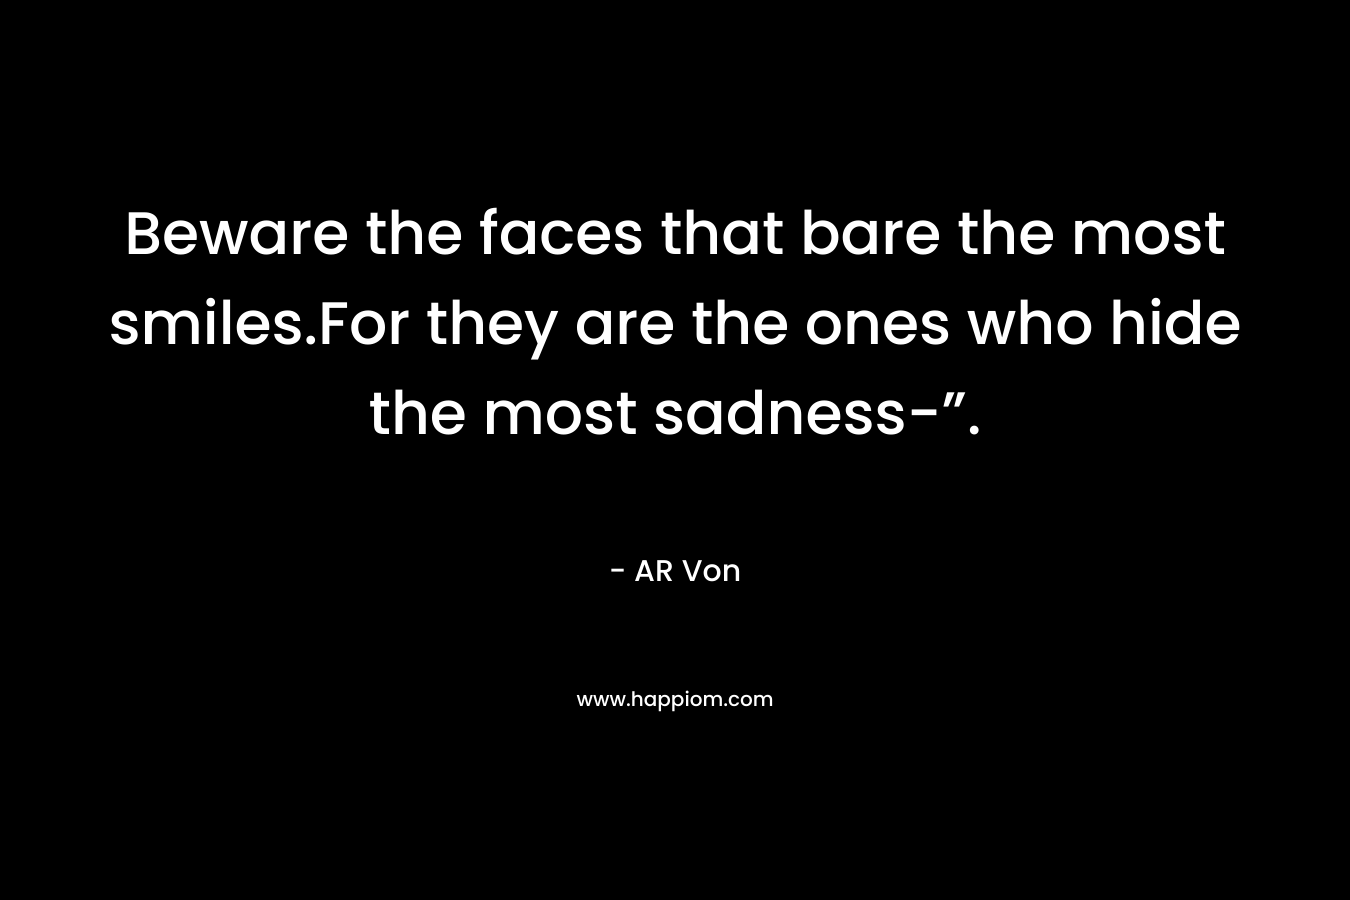 Beware the faces that bare the most smiles.For they are the ones who hide the most sadness-”.